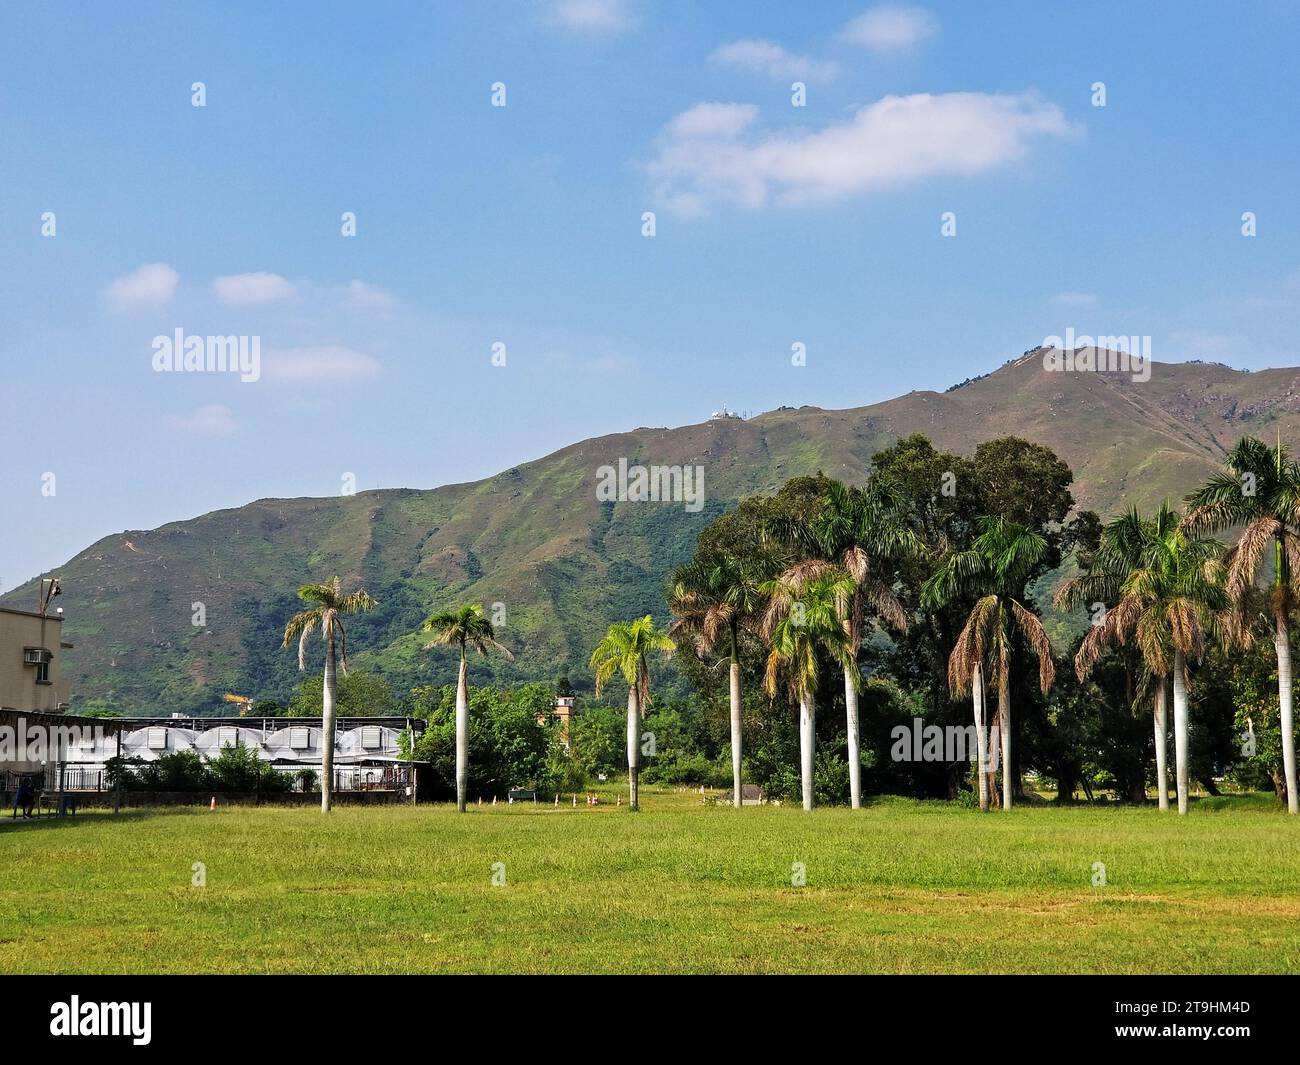 A group of palm trees in front of a mountain under a blue sky in Hong Kong -13 Stock Photo